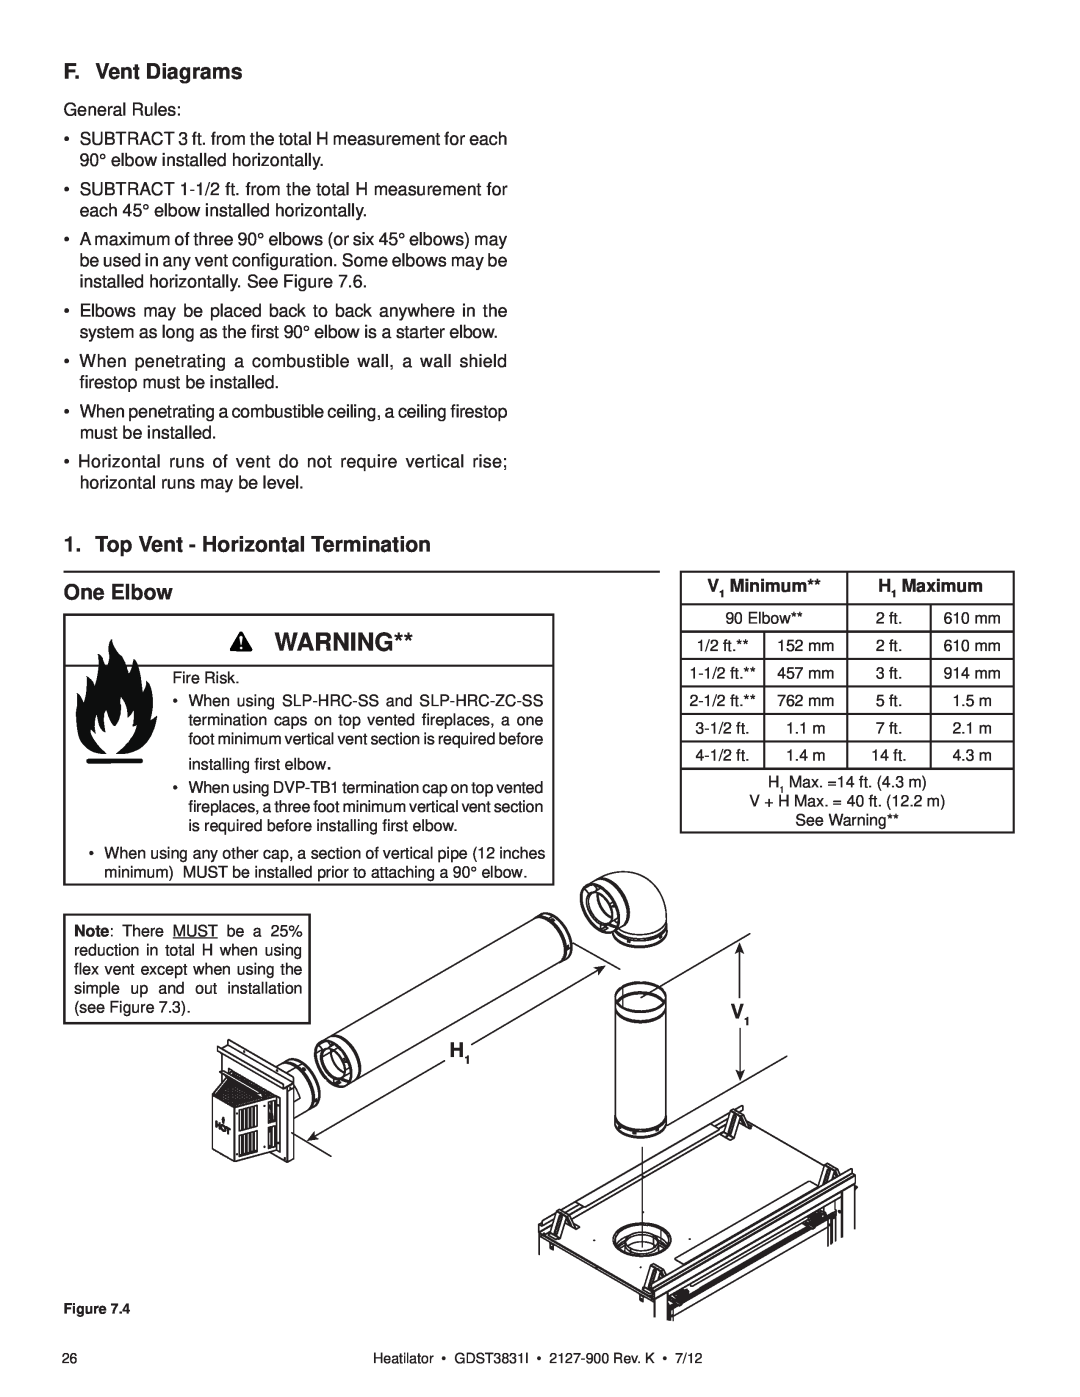 Heatiator GDST3831I owner manual F. Vent Diagrams, Top Vent - Horizontal Termination One Elbow 